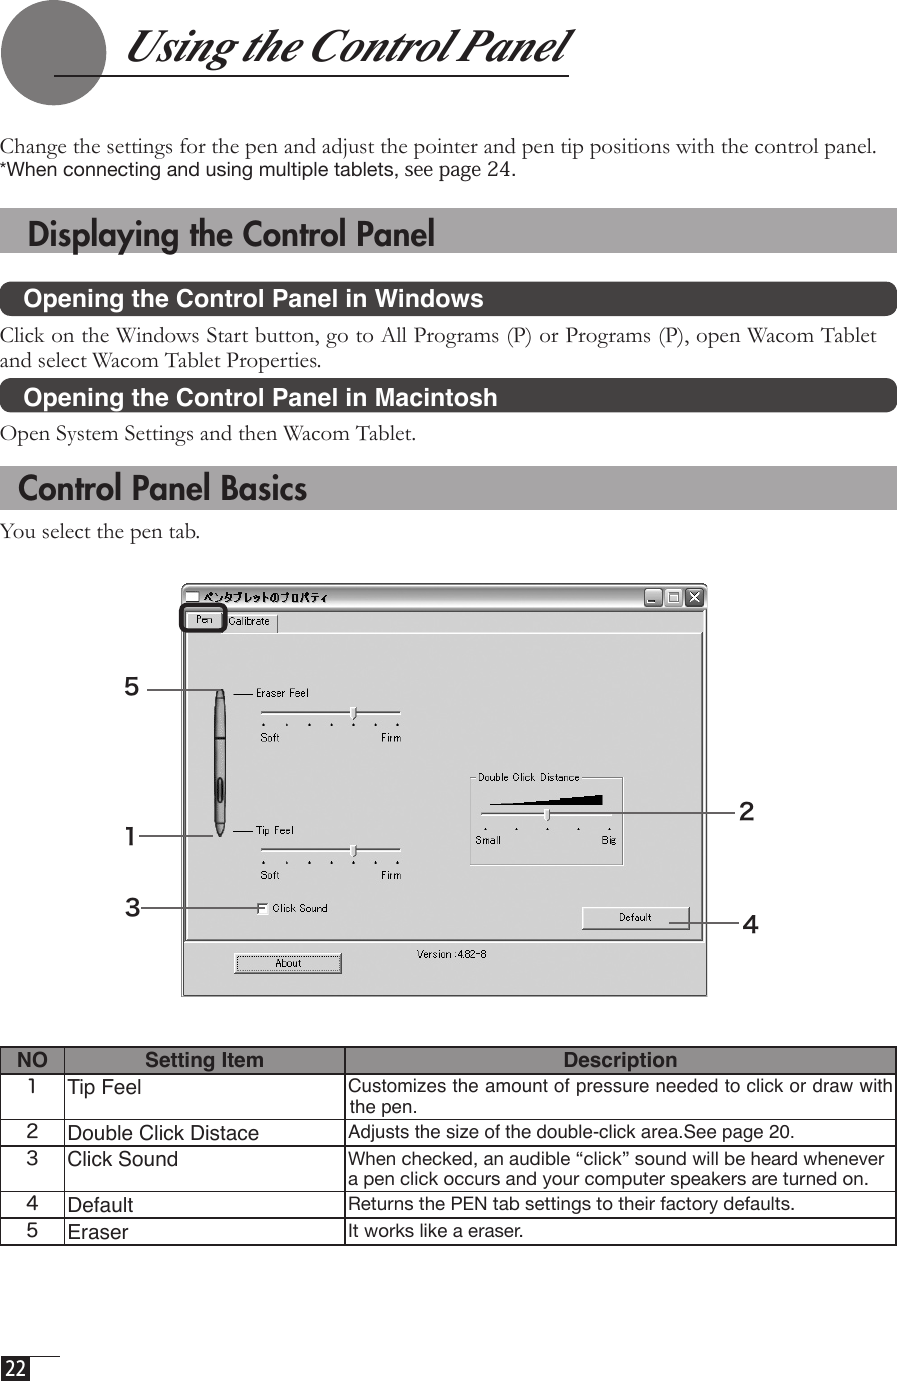  22     Using the Control PanelChange the settings for the pen and adjust the pointer and pen tip positions with the control panel. *When connecting and using multiple tablets, see page 24.   Displaying the Control Panel   Opening the Control Panel in WindowsClick on the Windows Start button, go to All Programs (P) or Programs (P), open Wacom Tablet and select Wacom Tablet Properties.   Opening the Control Panel in Macintosh Open System Settings and then Wacom Tablet.NO Setting Item Description1Tip Feel Customizes the amount of pressure needed to click or draw with the pen.2Double Click Distace Adjusts the size of the double-click area.See page 20.3Click Sound When checked, an audible “click” sound will be heard whenever a pen click occurs and your computer speakers are turned on.4Default Returns the PEN tab settings to their factory defaults.5Eraser It works like a eraser.5124  Control Panel BasicsYou select the pen tab.3